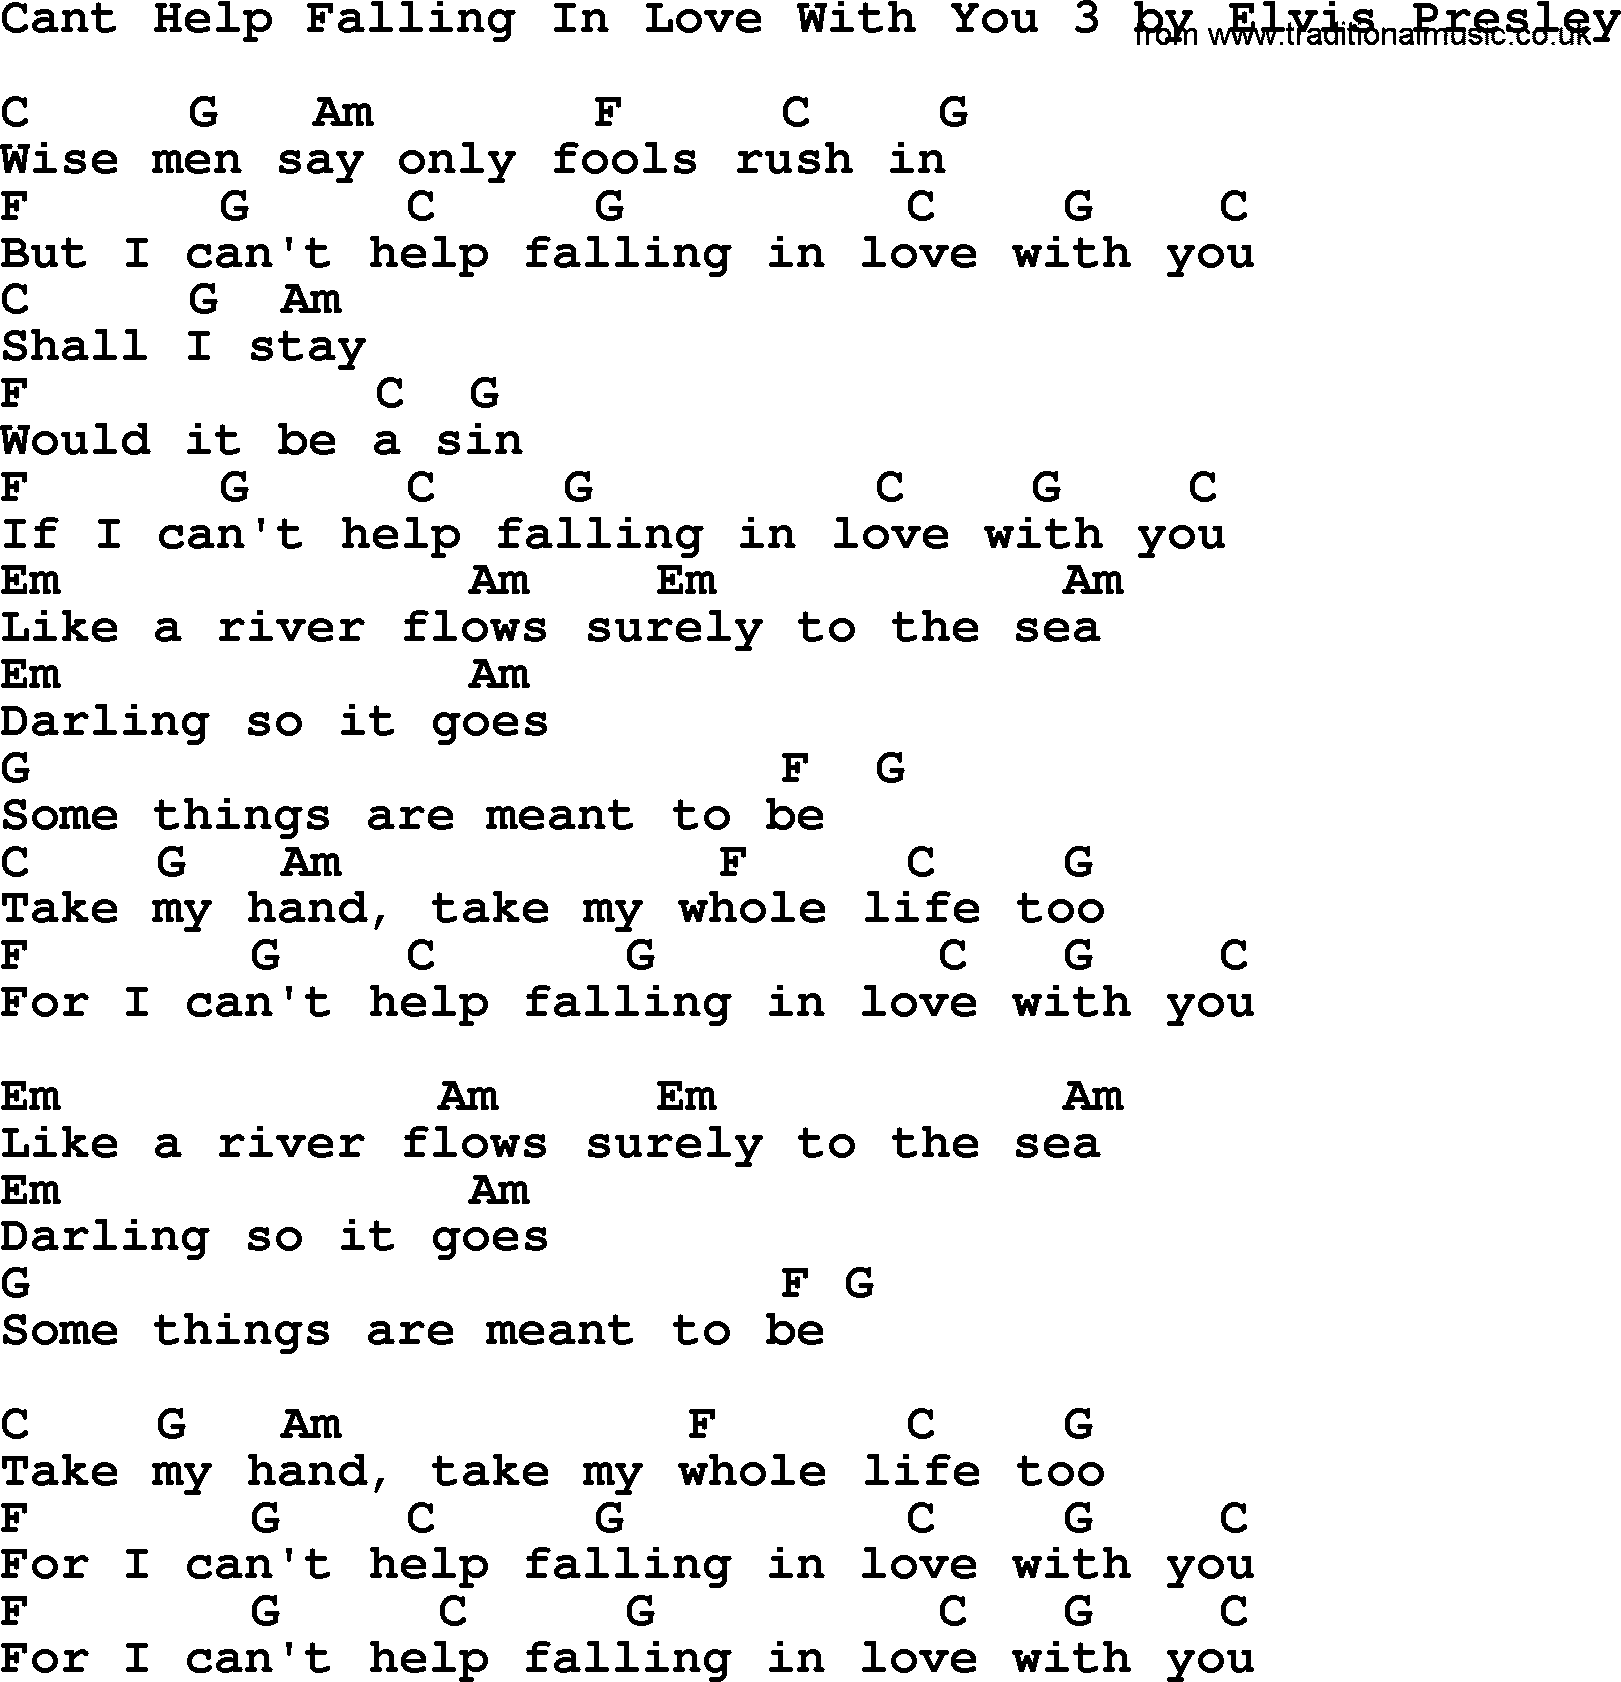 Elvis Presley song: Cant Help Falling In Love With You 3, lyrics and chords